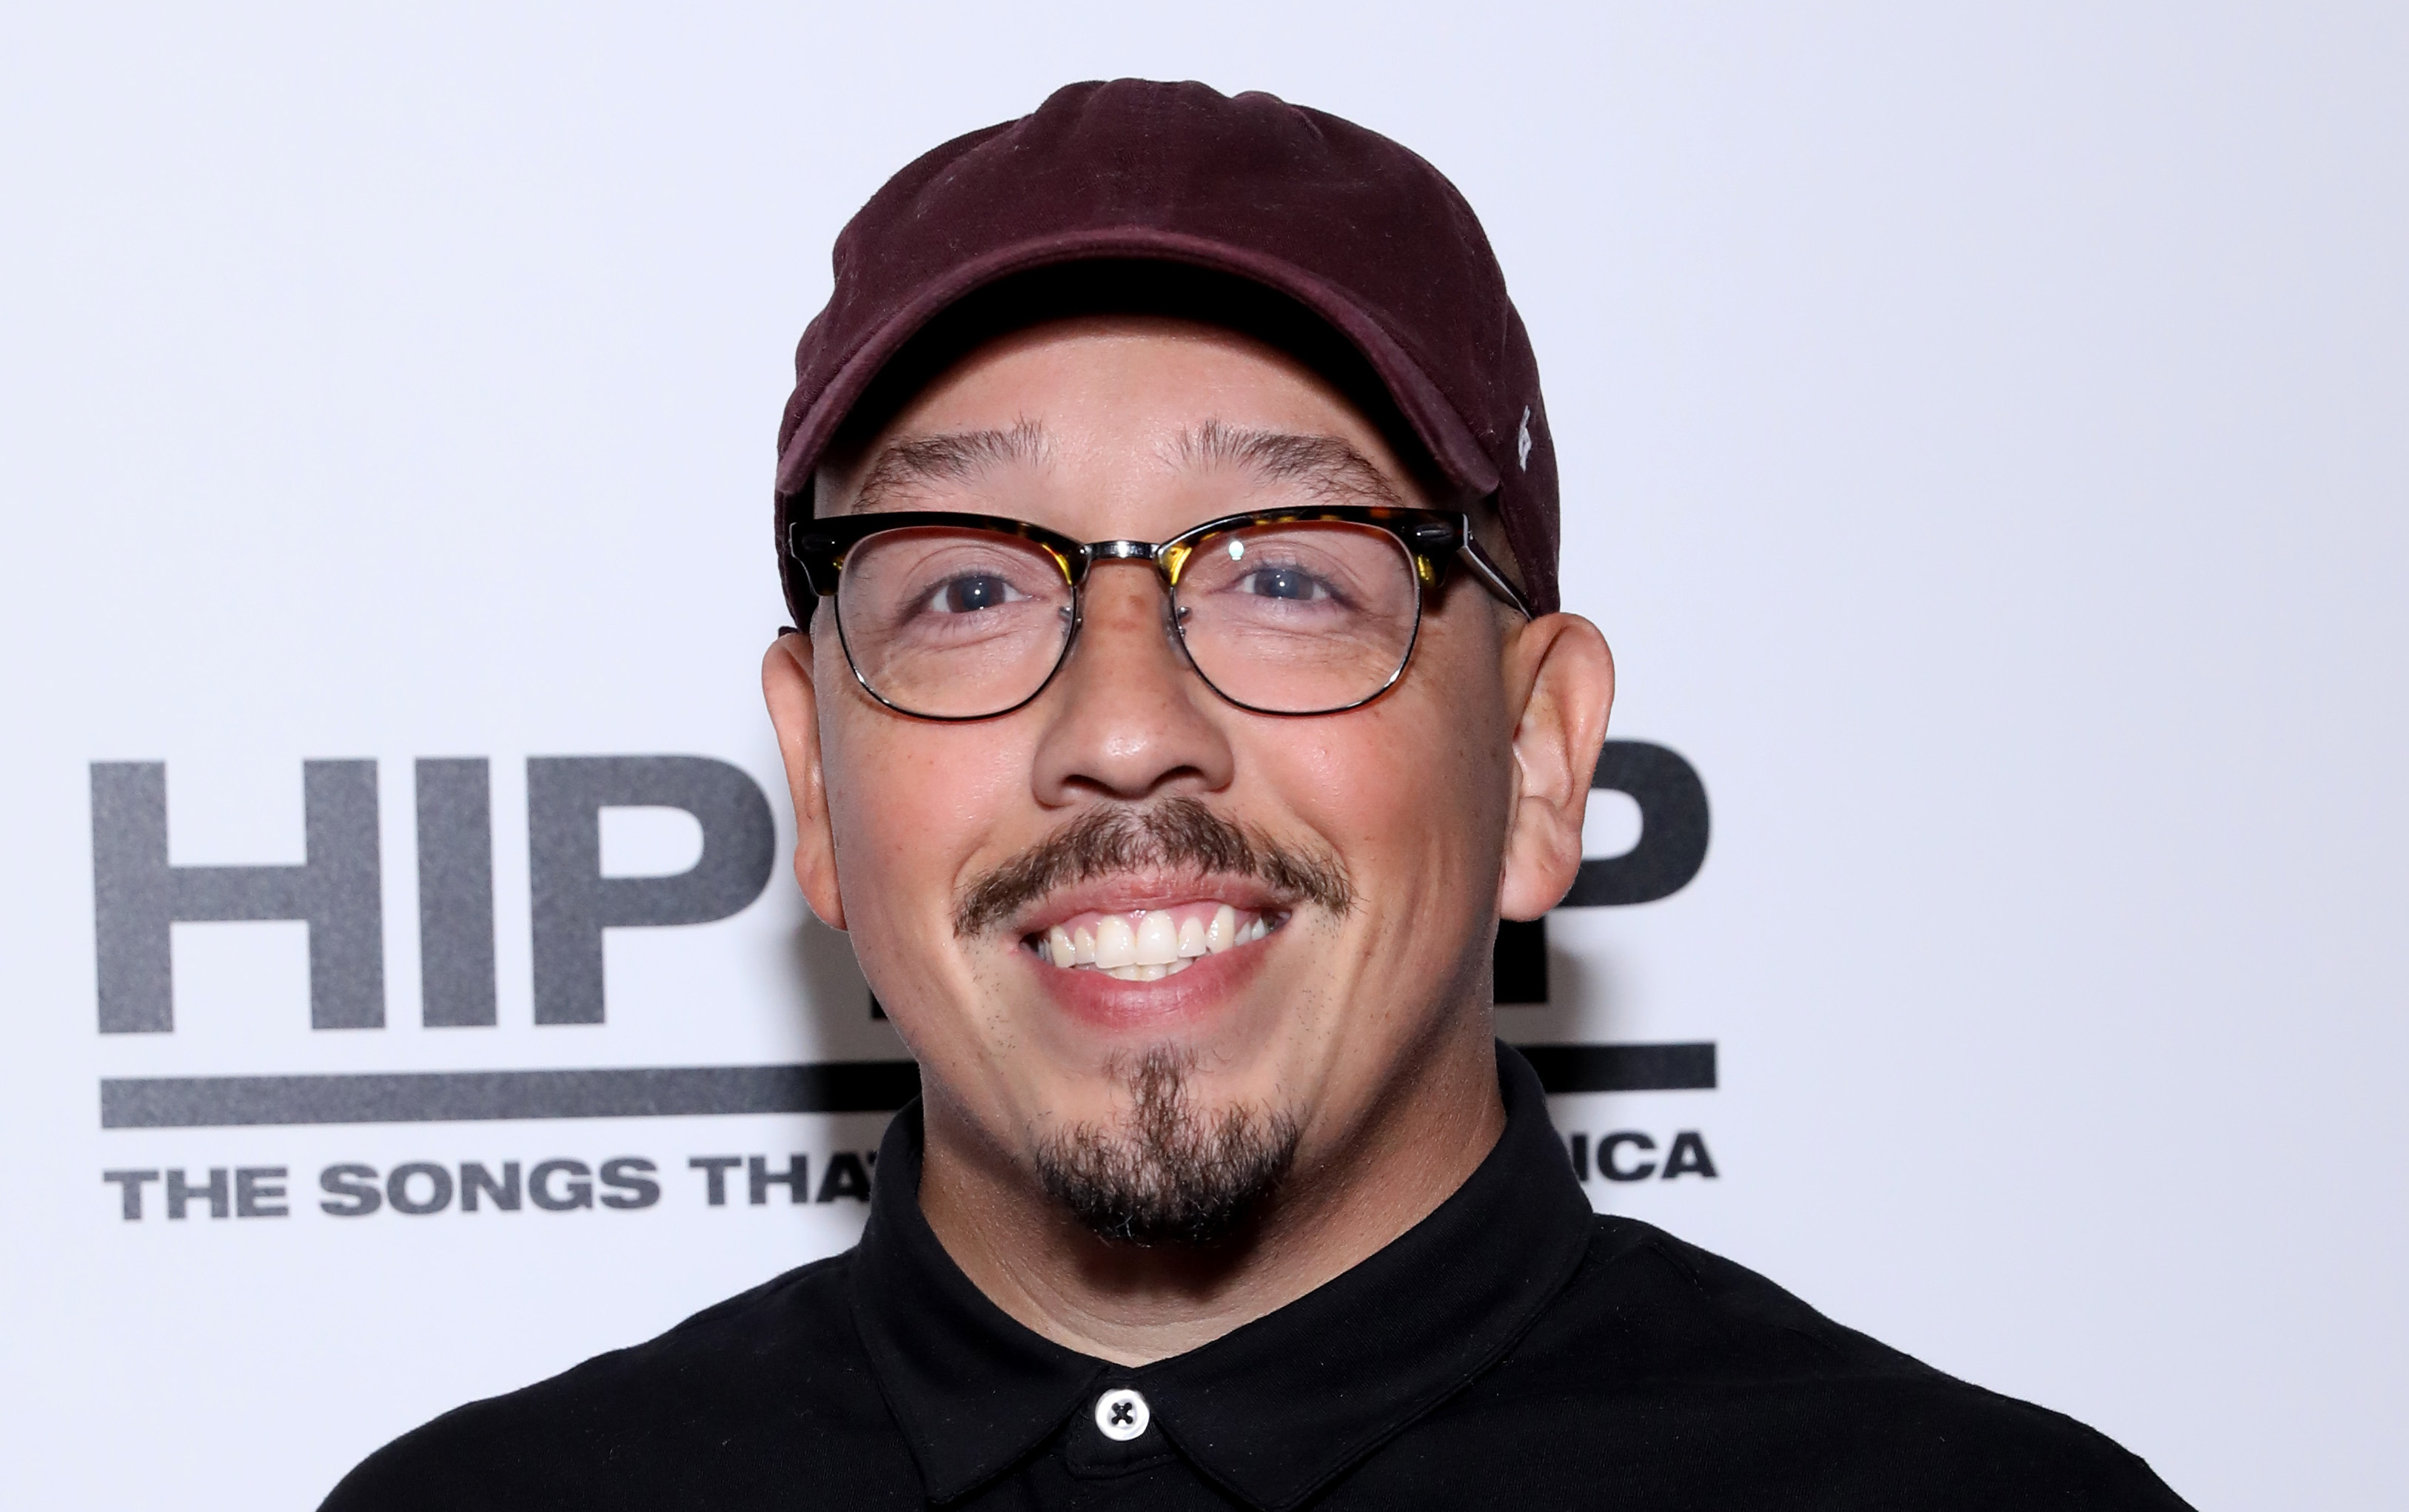 Shea Serrano attends "Hip Hop: Songs that Shook America" Screening/Event at The Apollo Theater on October 07, 2019. Photo by Robin Marchant/Getty Images for AMC